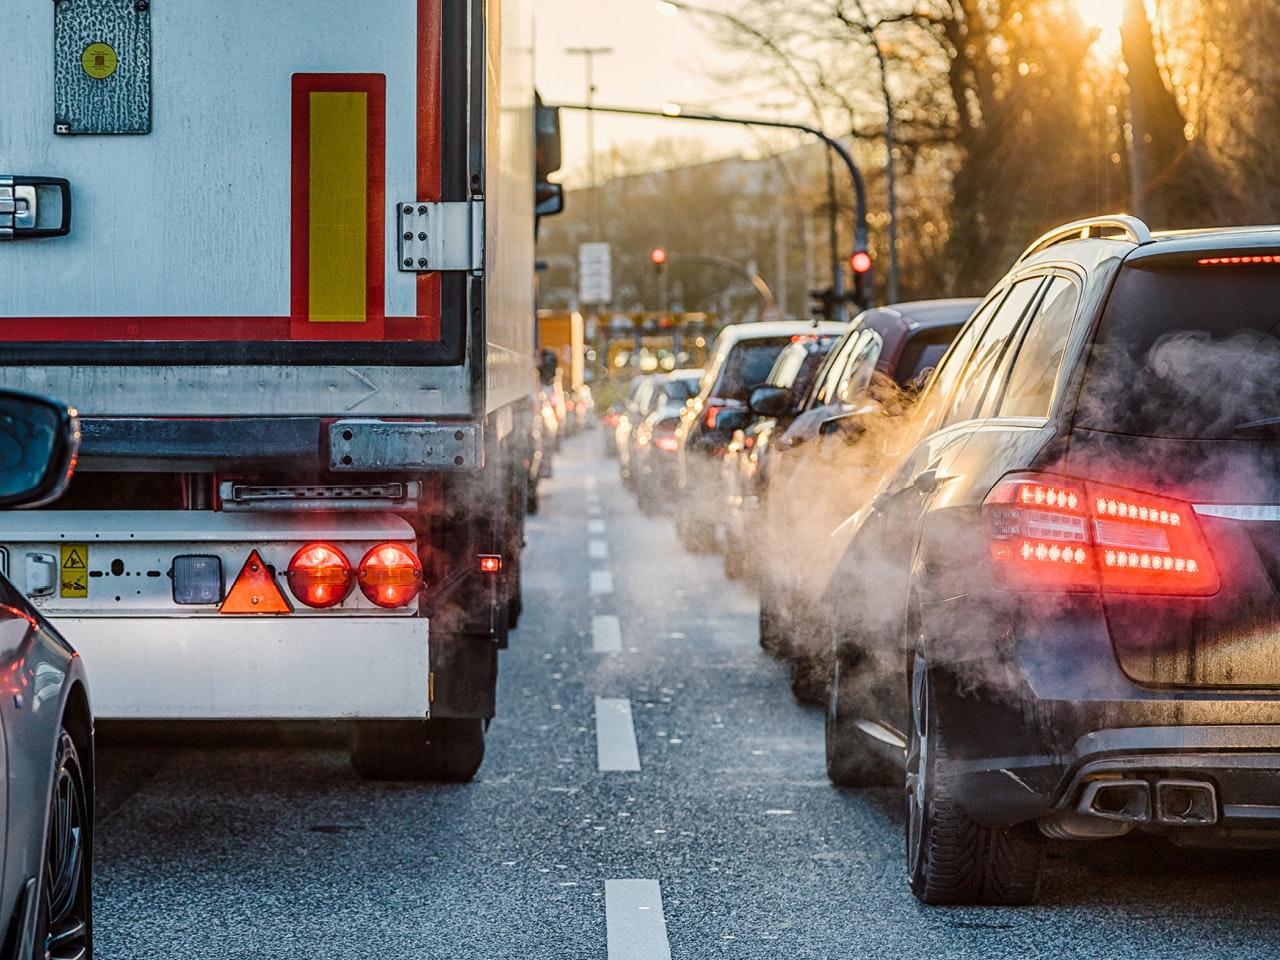 Vehicle emissions from cars in traffic